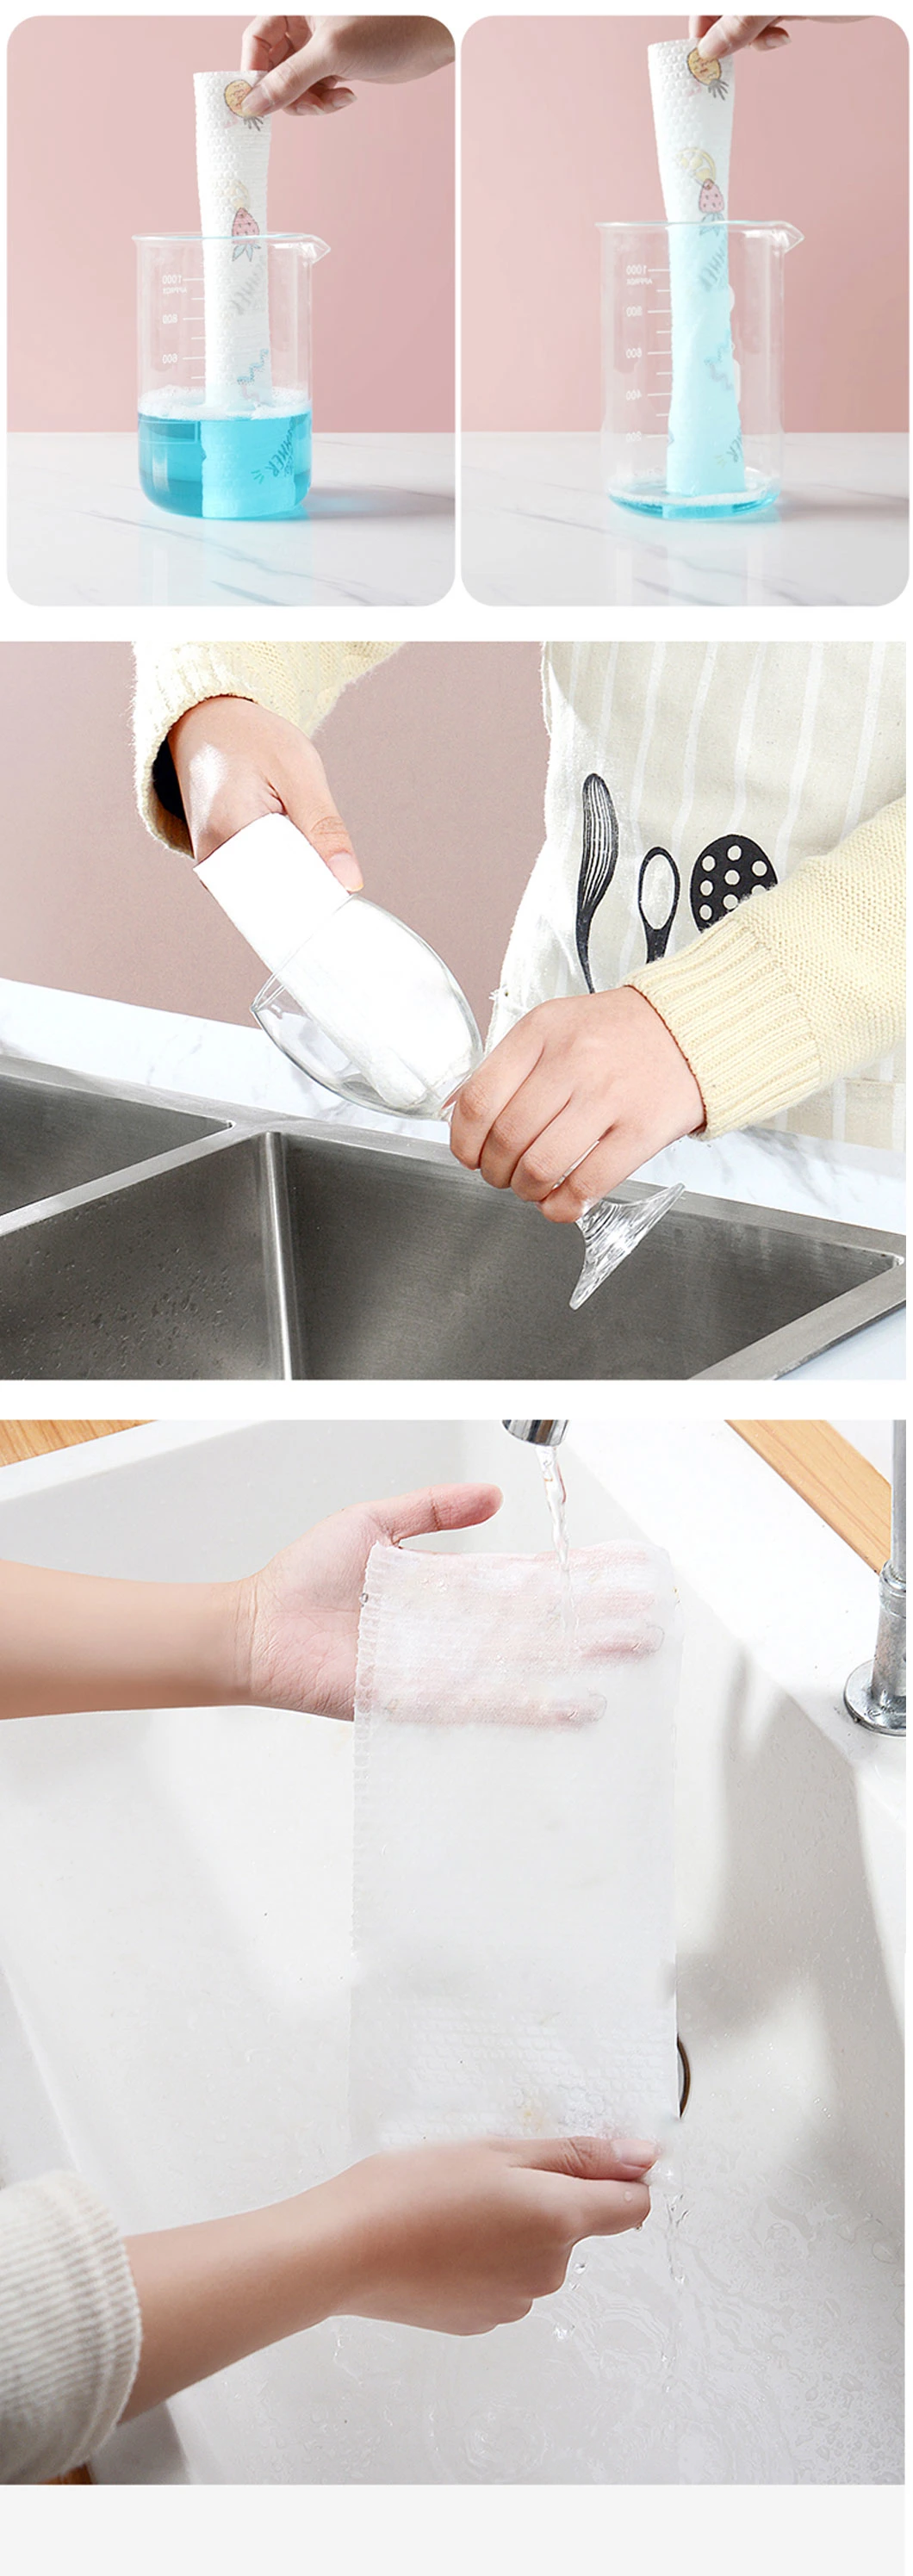 High Quality Kitchen Cleaning Non-Woven Cloth Disposable Cleaning Cloth Bowl Washing